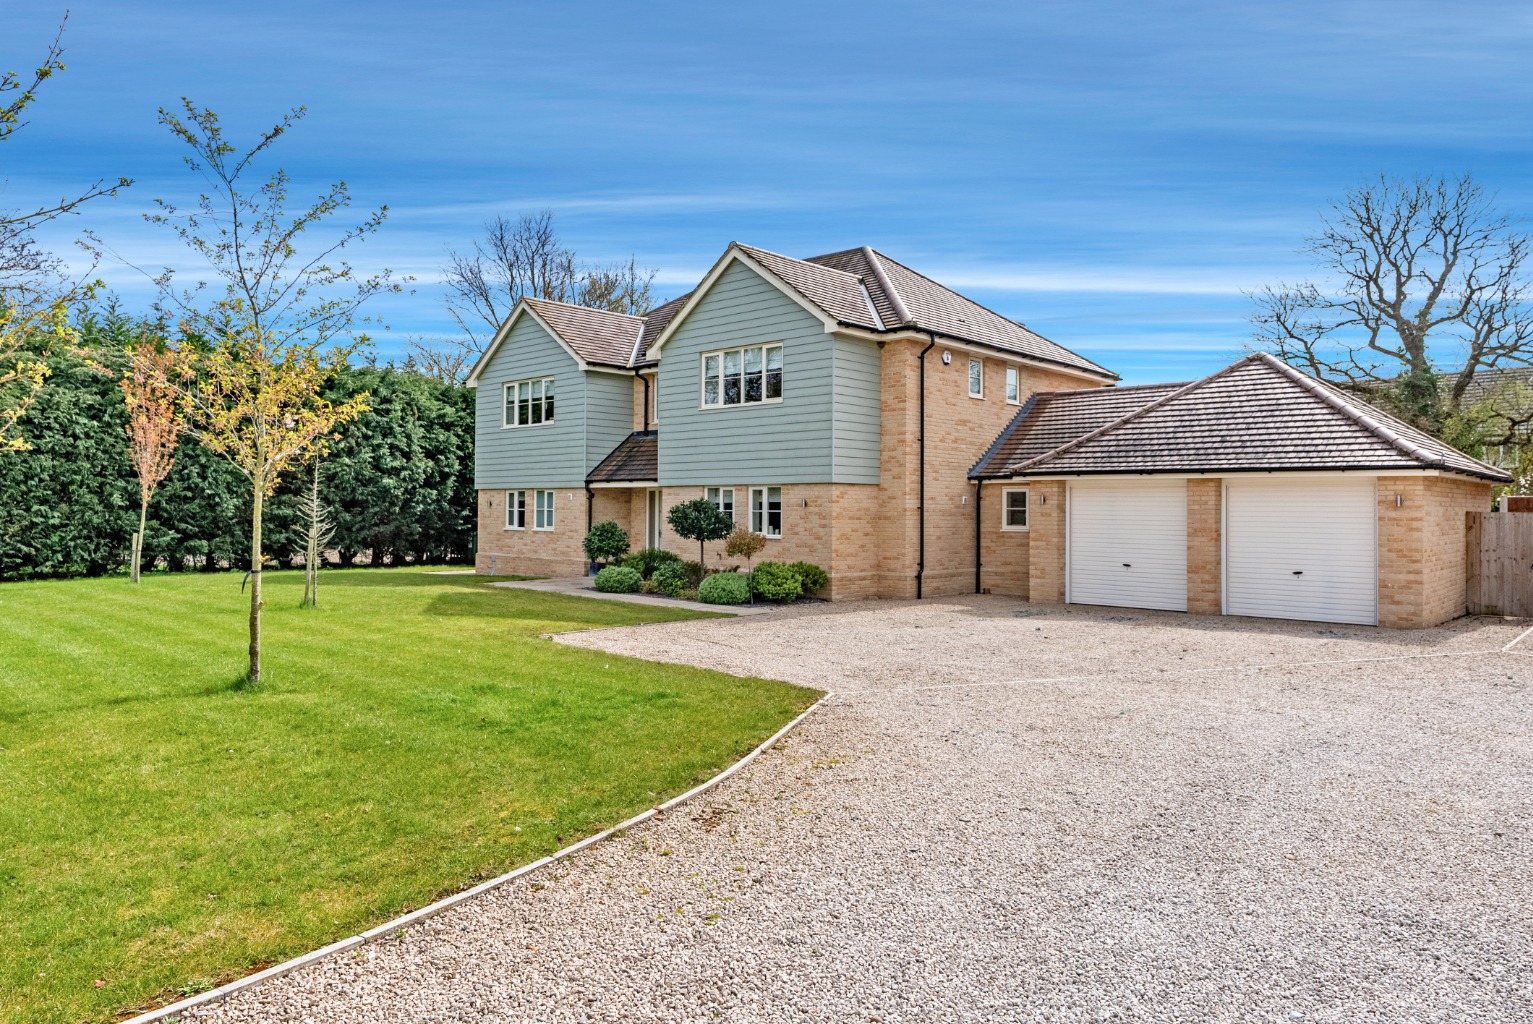 Situated in a secluded spot, at the end of a long and private drive, this stunning, executive home is one of just four similar size properties forming a very salubrious and select development, built under six years ago by renowned local builders, Ambury Developments Ltd.